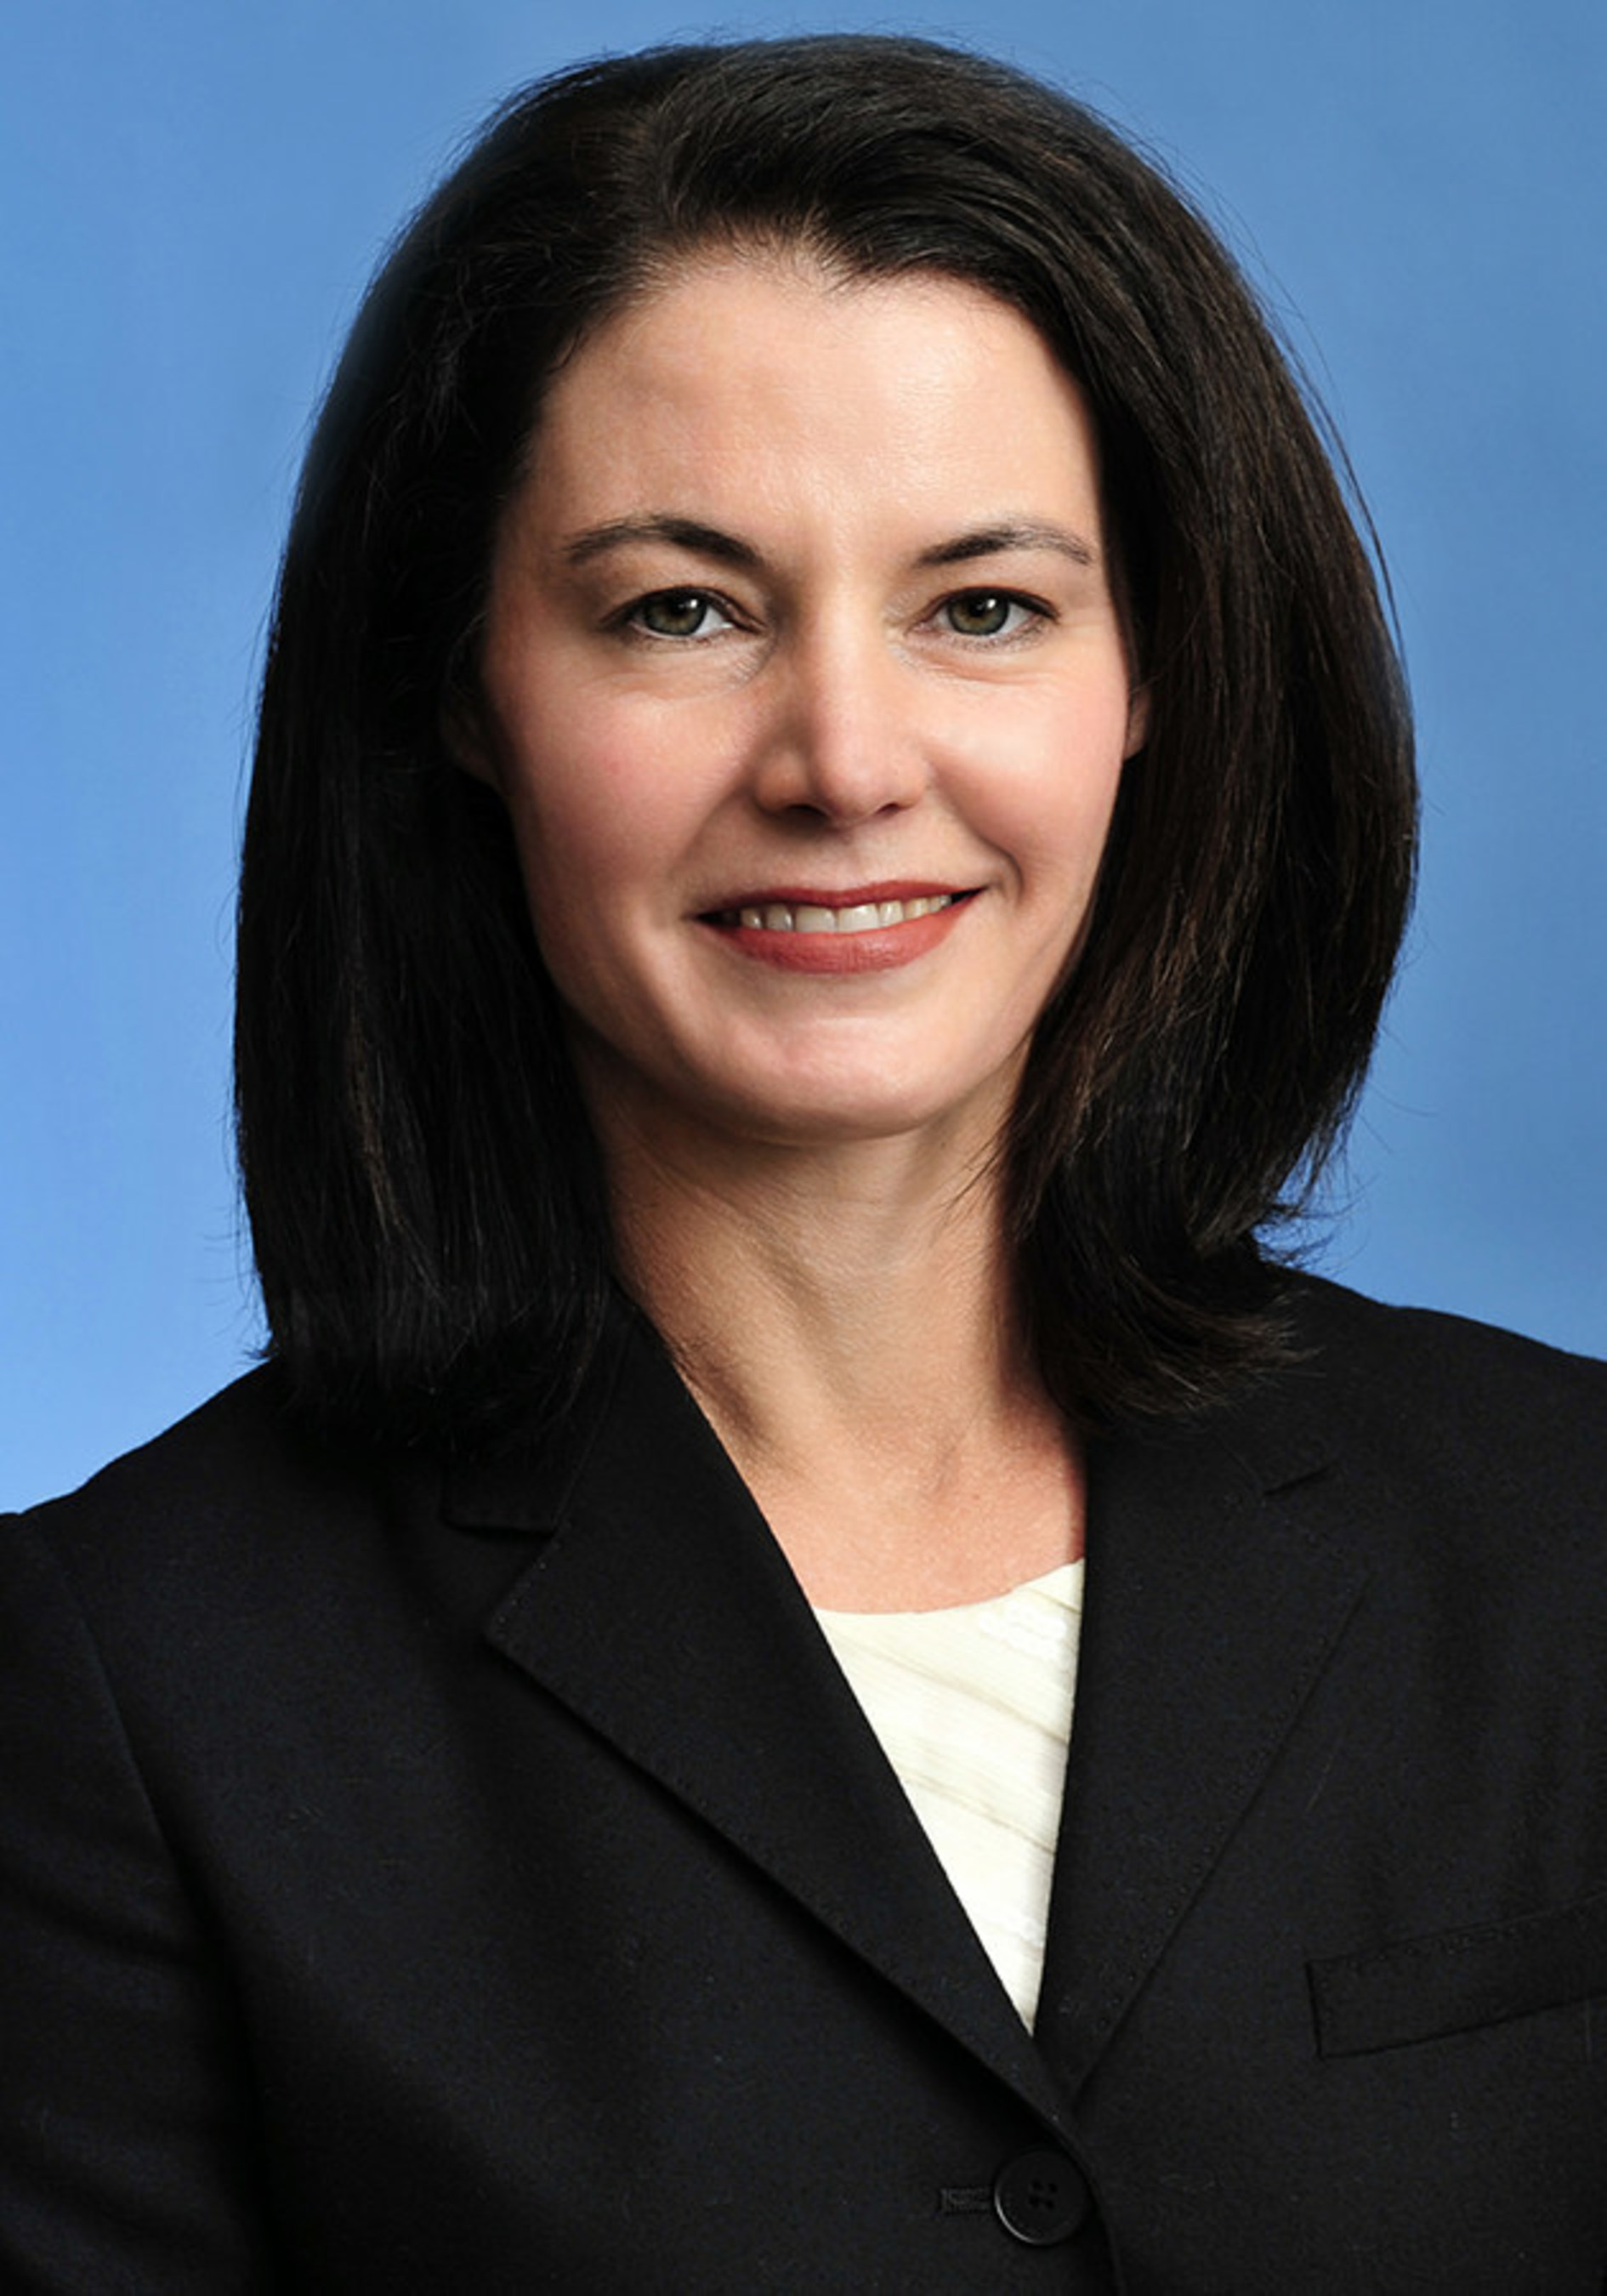 Anne E. Brynn, Department Counsel in Jenner & Block's Private Wealth Practice